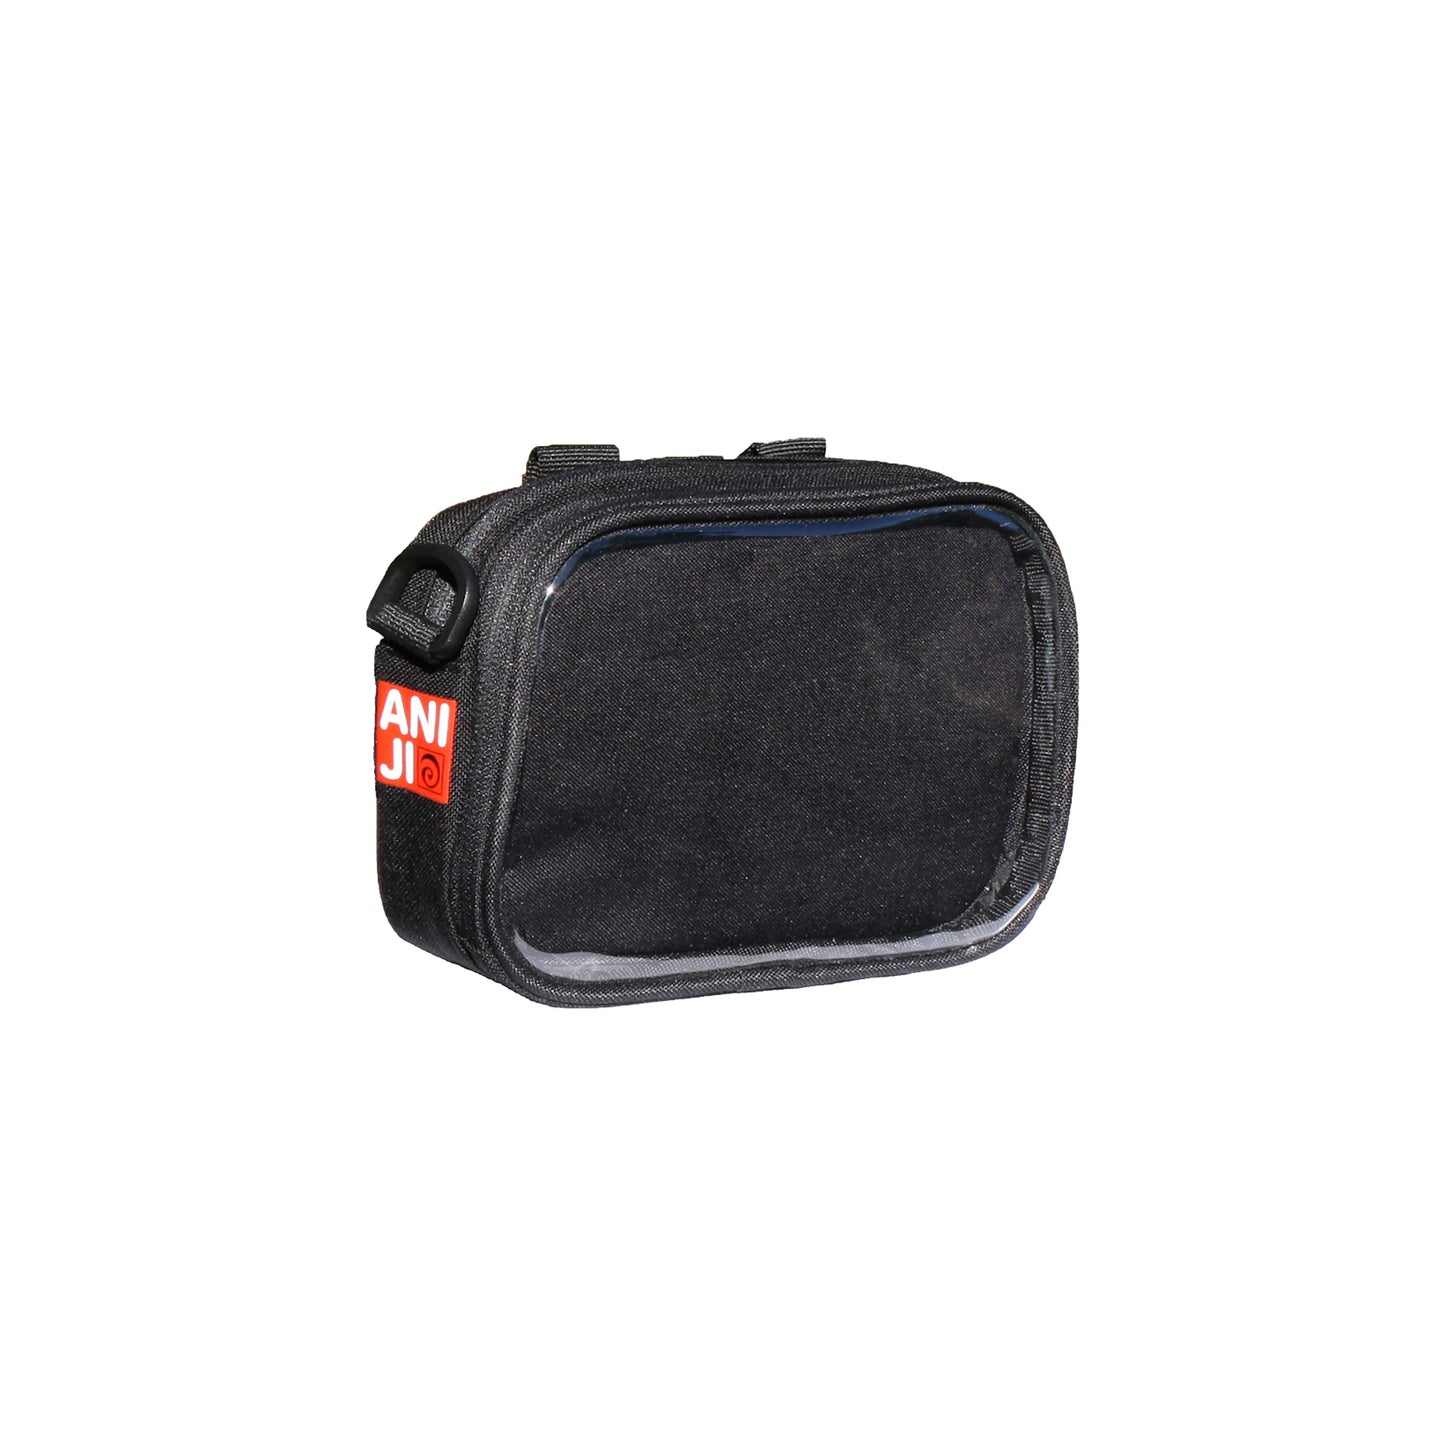 Bery Ita Fanny Pack with Detachable Shoulder Strap (Black)